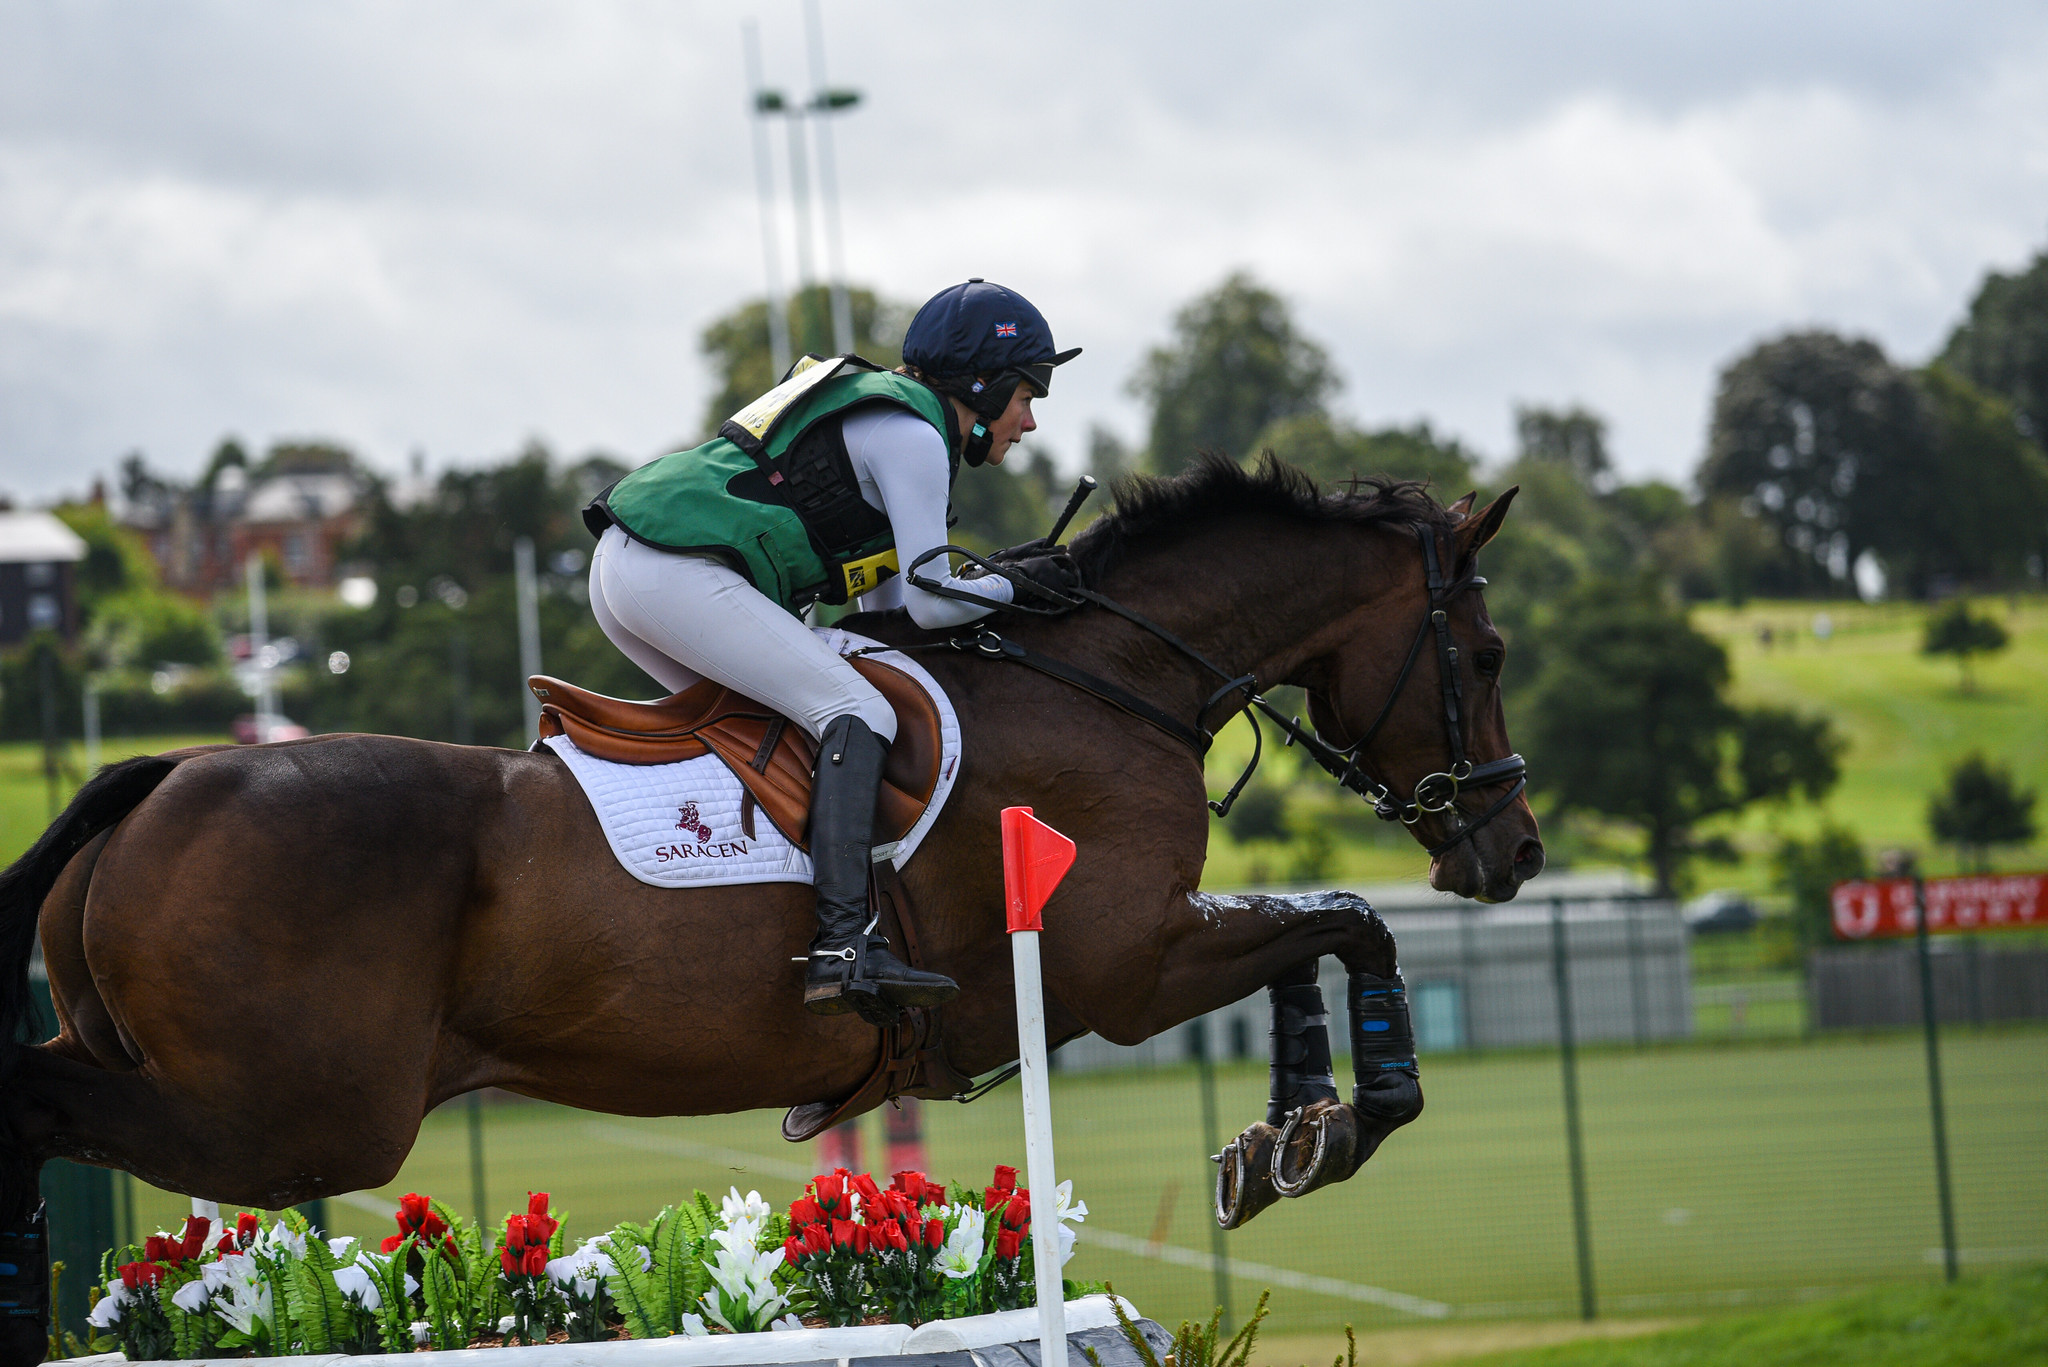 The dates for the FEI Dressage and Eventing European Championships for Young Riders and Juniors 2022 at Hartpury have been confirmed.